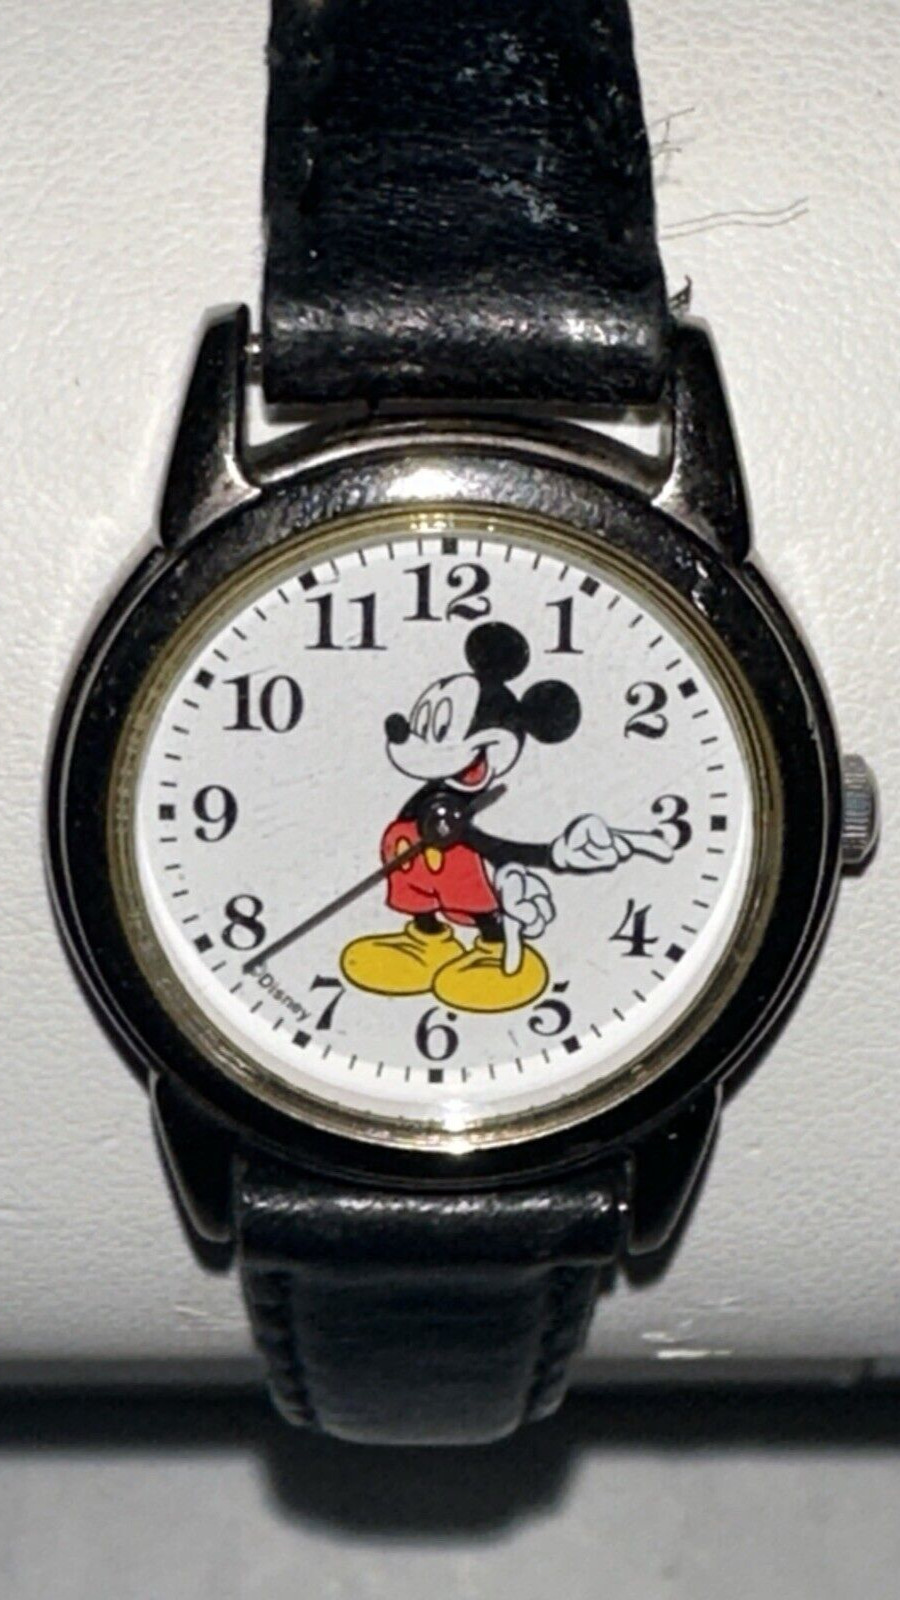 Disney Mickey Mouse Watch SII Marketing RRS377 WR 30 ATM Leather Band WORKS VTG